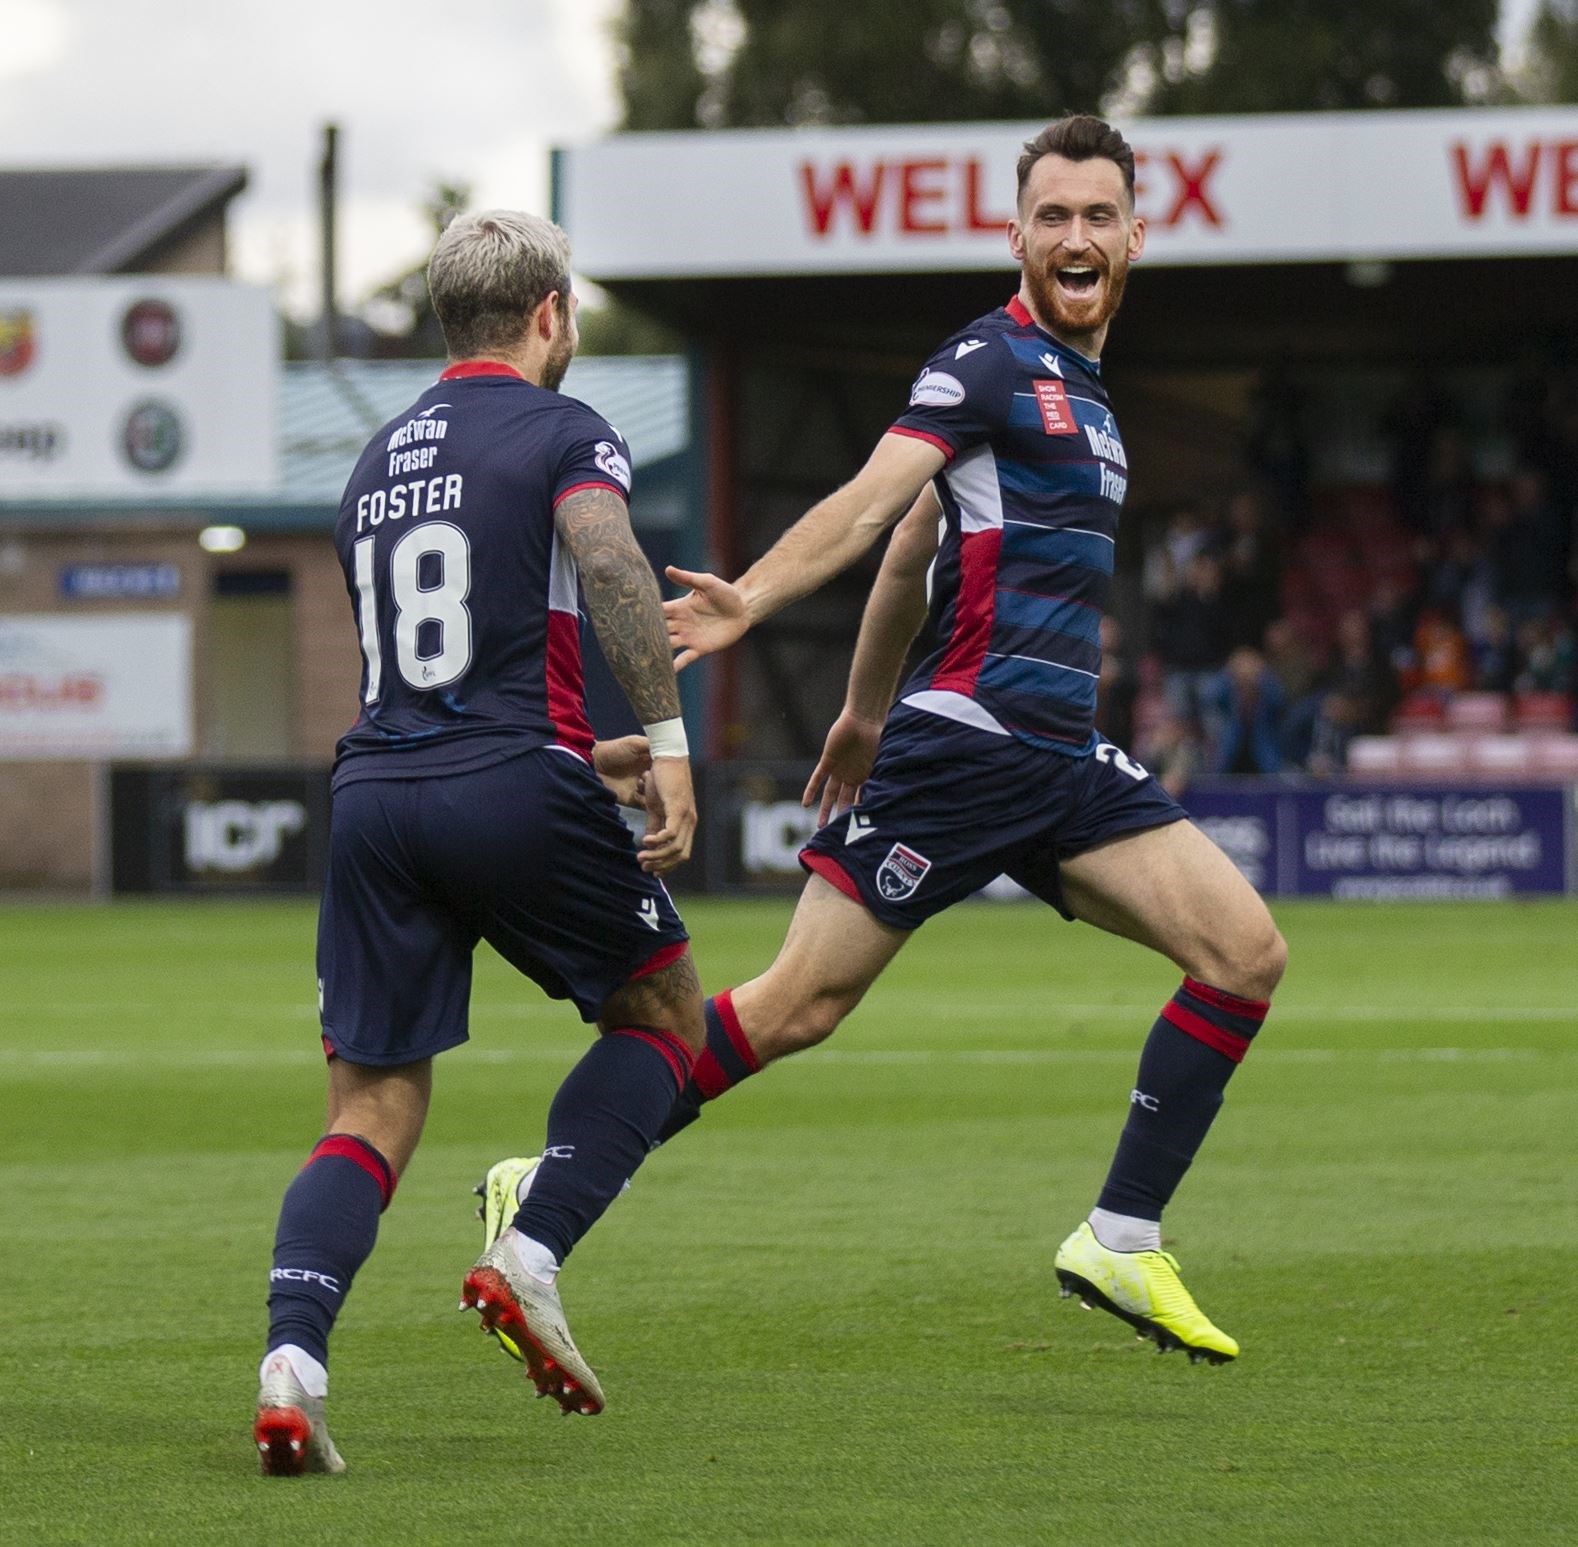 Picture - Ken Macpherson, Inverness. Ross County(2) v St.Johnstone(2). 05.10.19. Ross County's Joe Chalmers celebrates his goal.